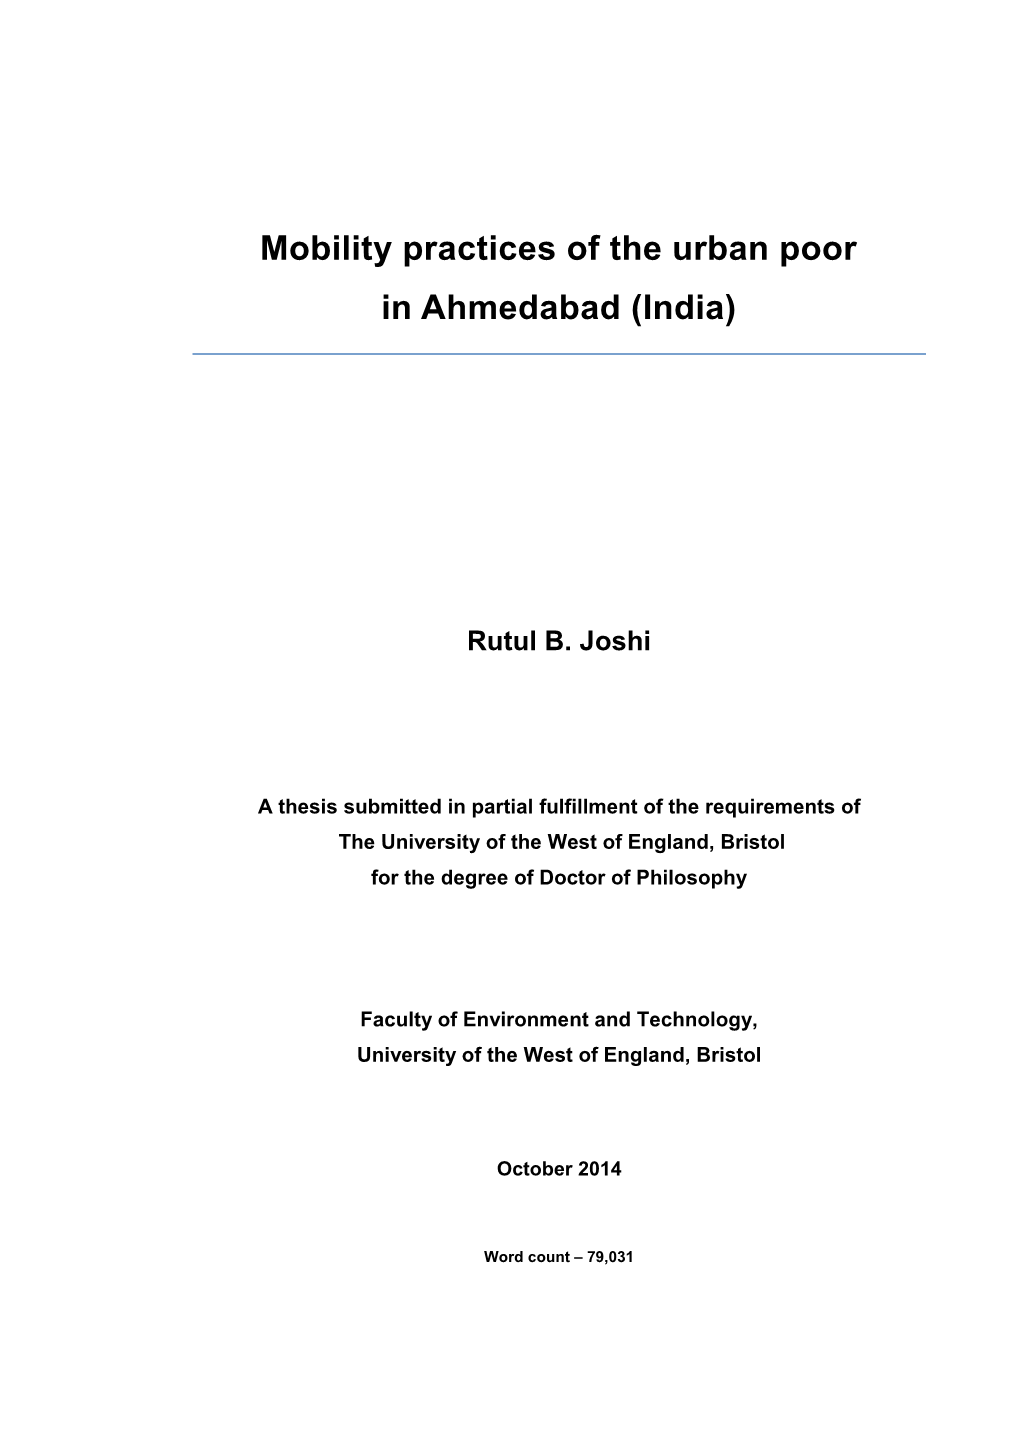 Mobility Practices of the Urban Poor in Ahmedabad (India)